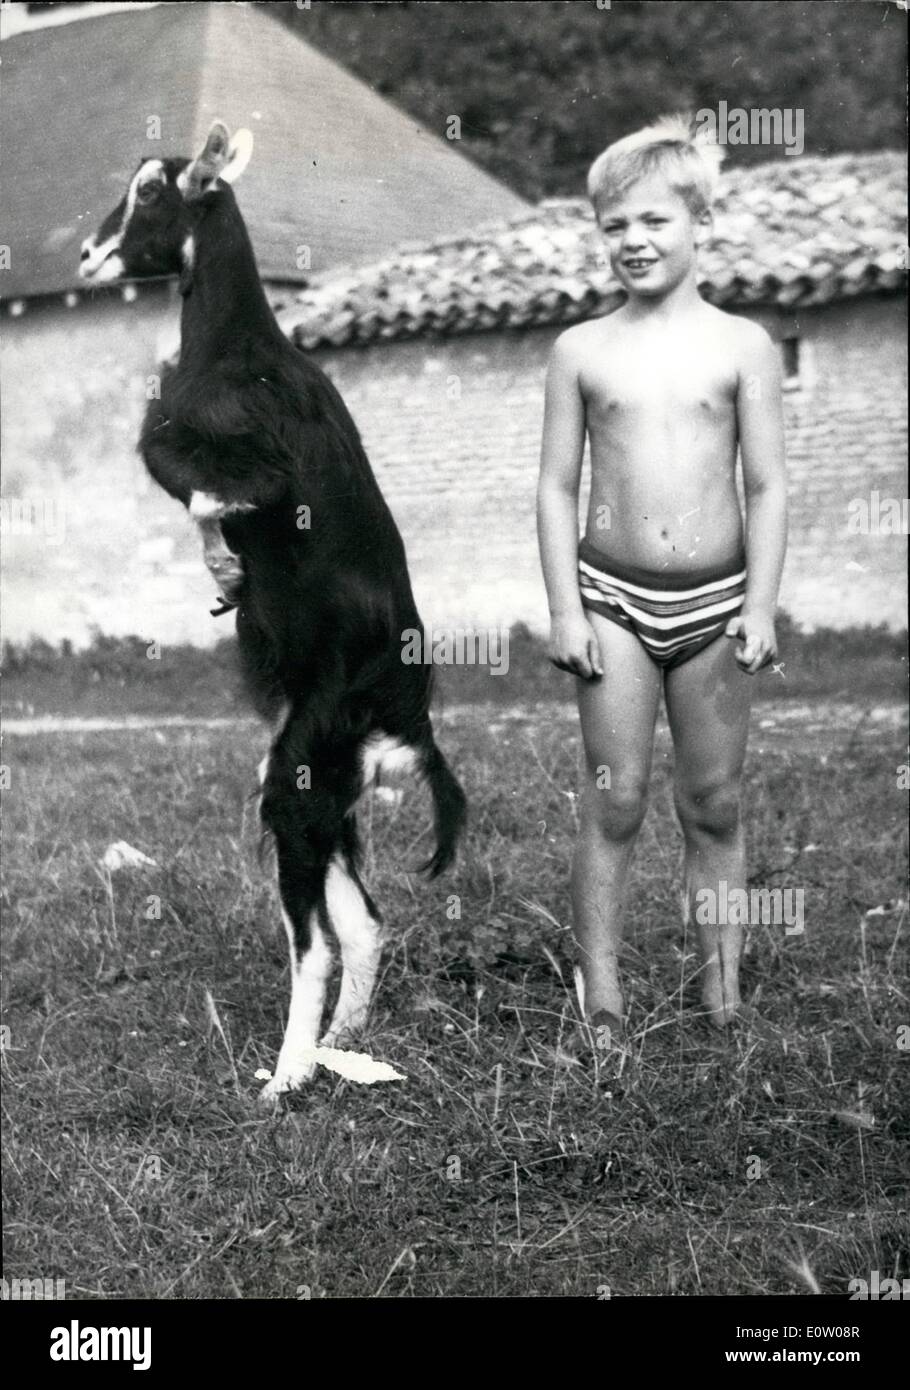 Oct. 10, 1960 - A goat-kangaroo: Two years ago a she goat with atrophied fore legs was born in a French farm near Poitiers. The Stock Photo